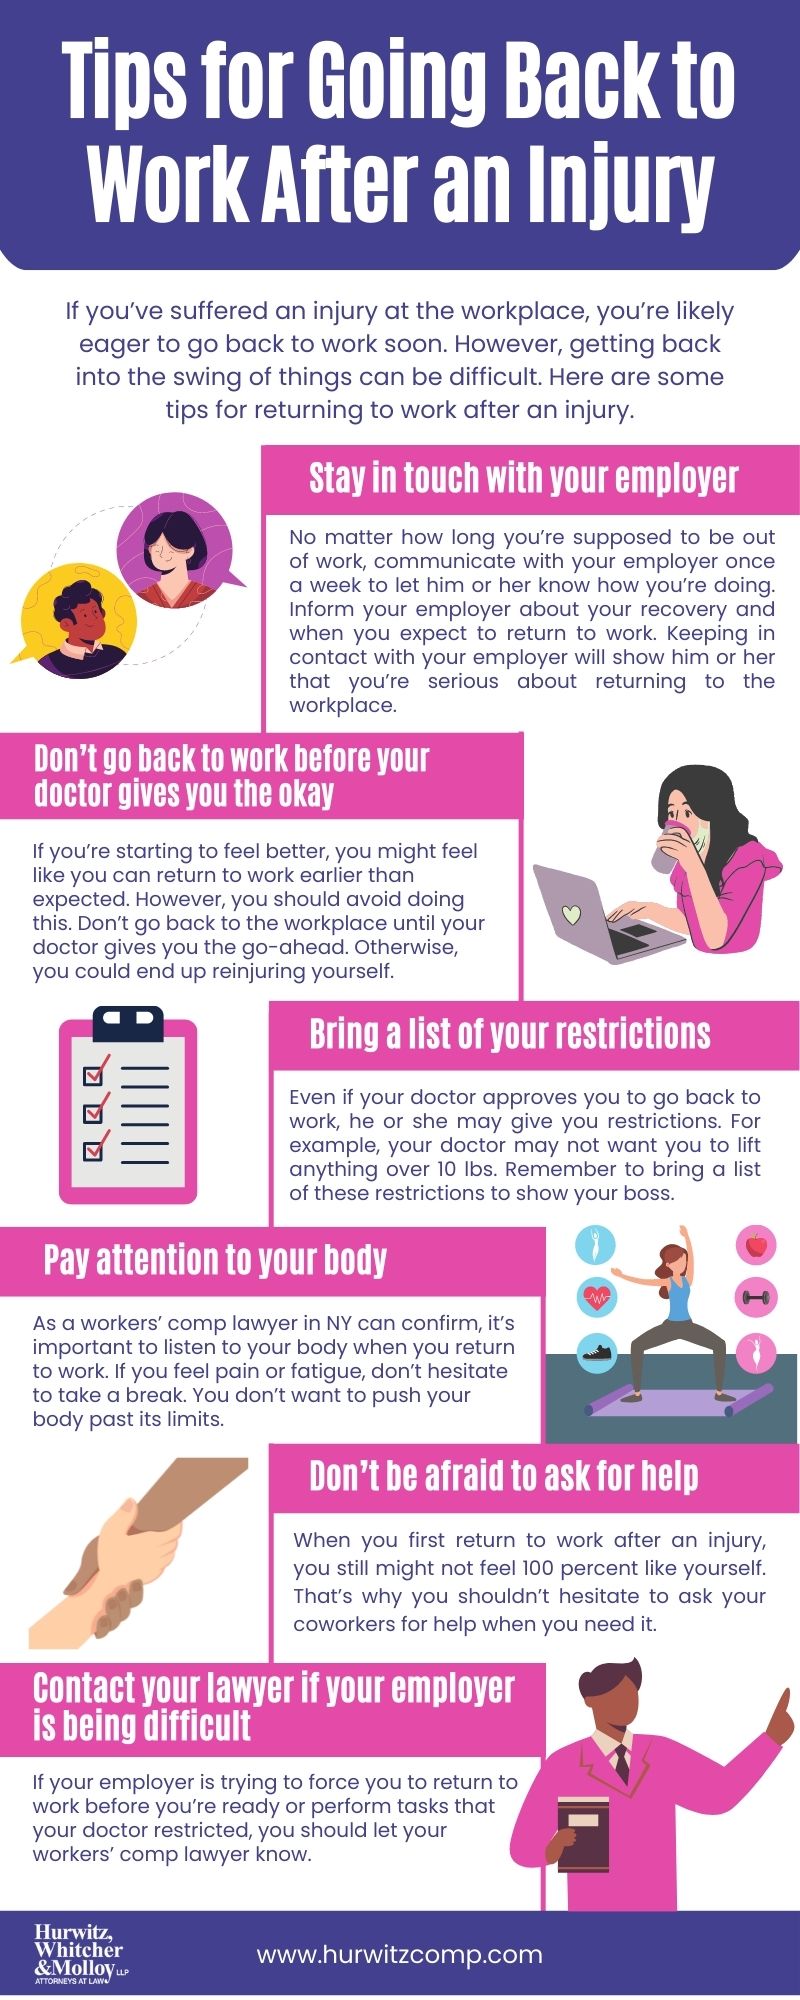 Tips For Going Back To Work After An Injury Infographic